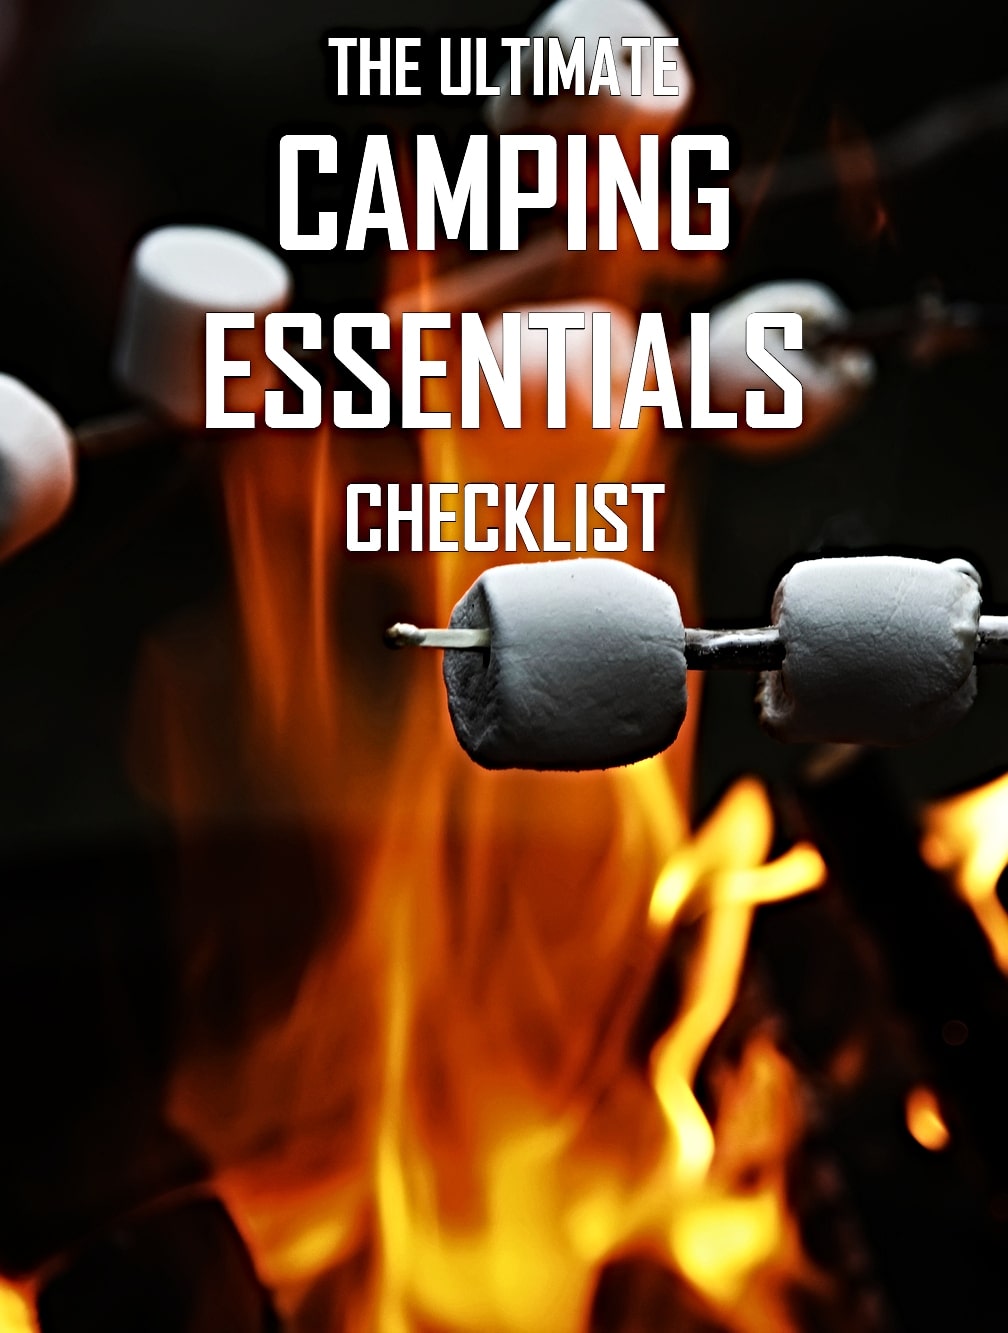 Camping Gear Checklist eBook Cover - roasting marshmallows on sticks over a campfire